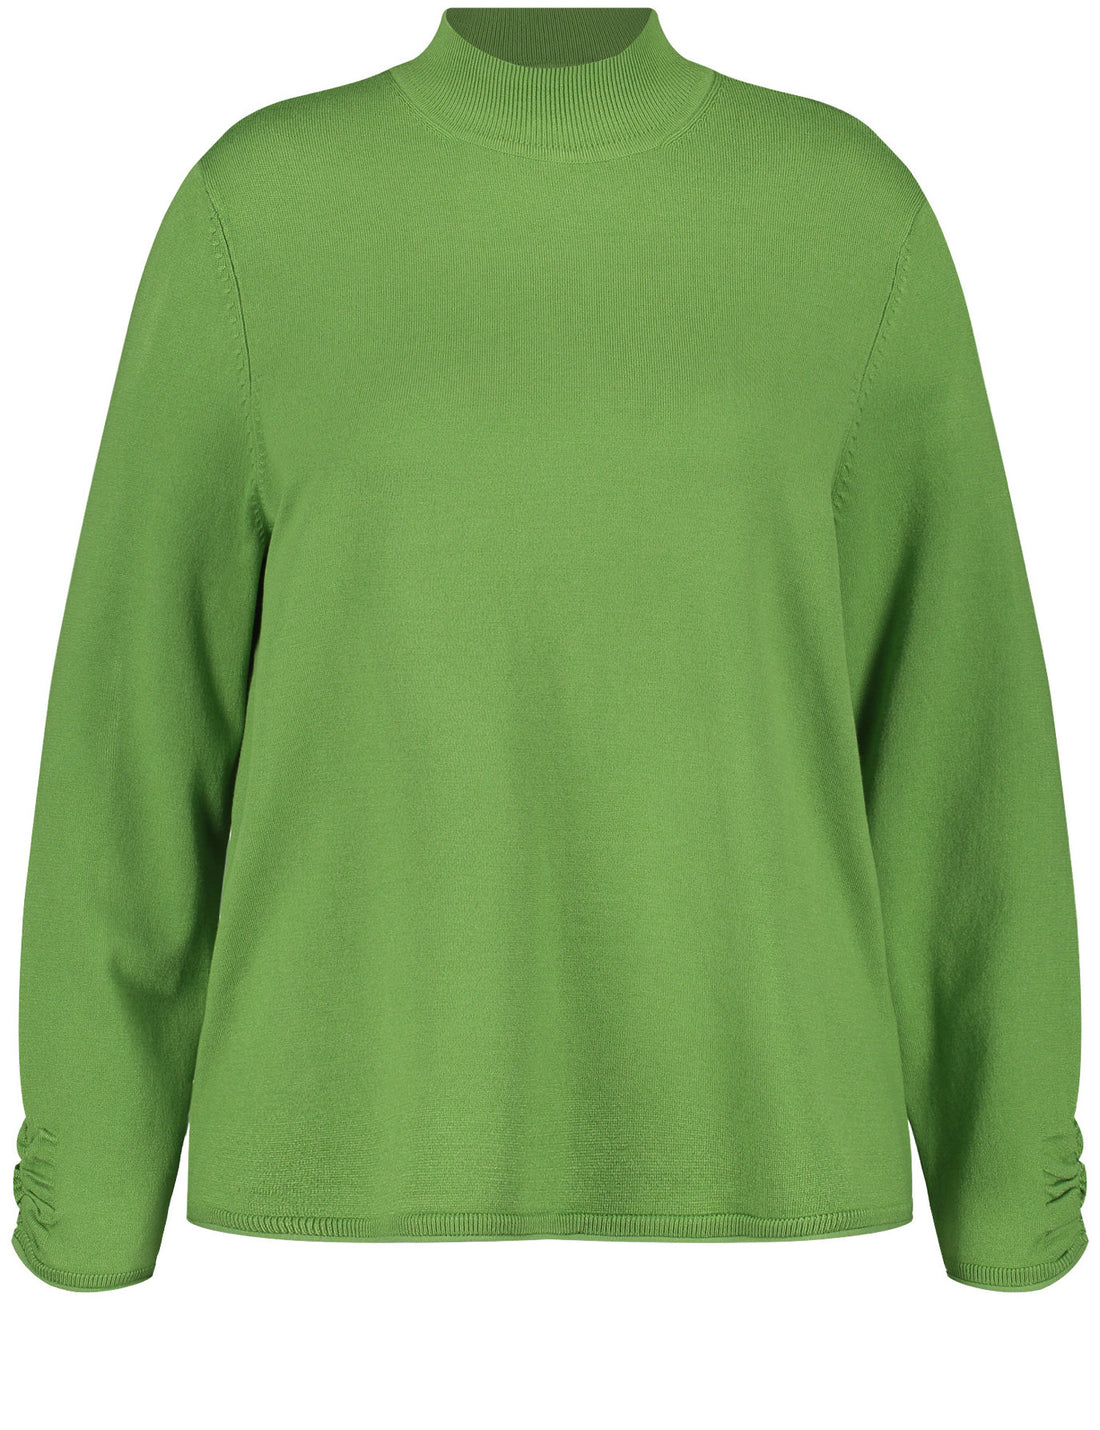 Fine Knit Jumper With Gathers On The Sleeves_372217-25400_5560_02